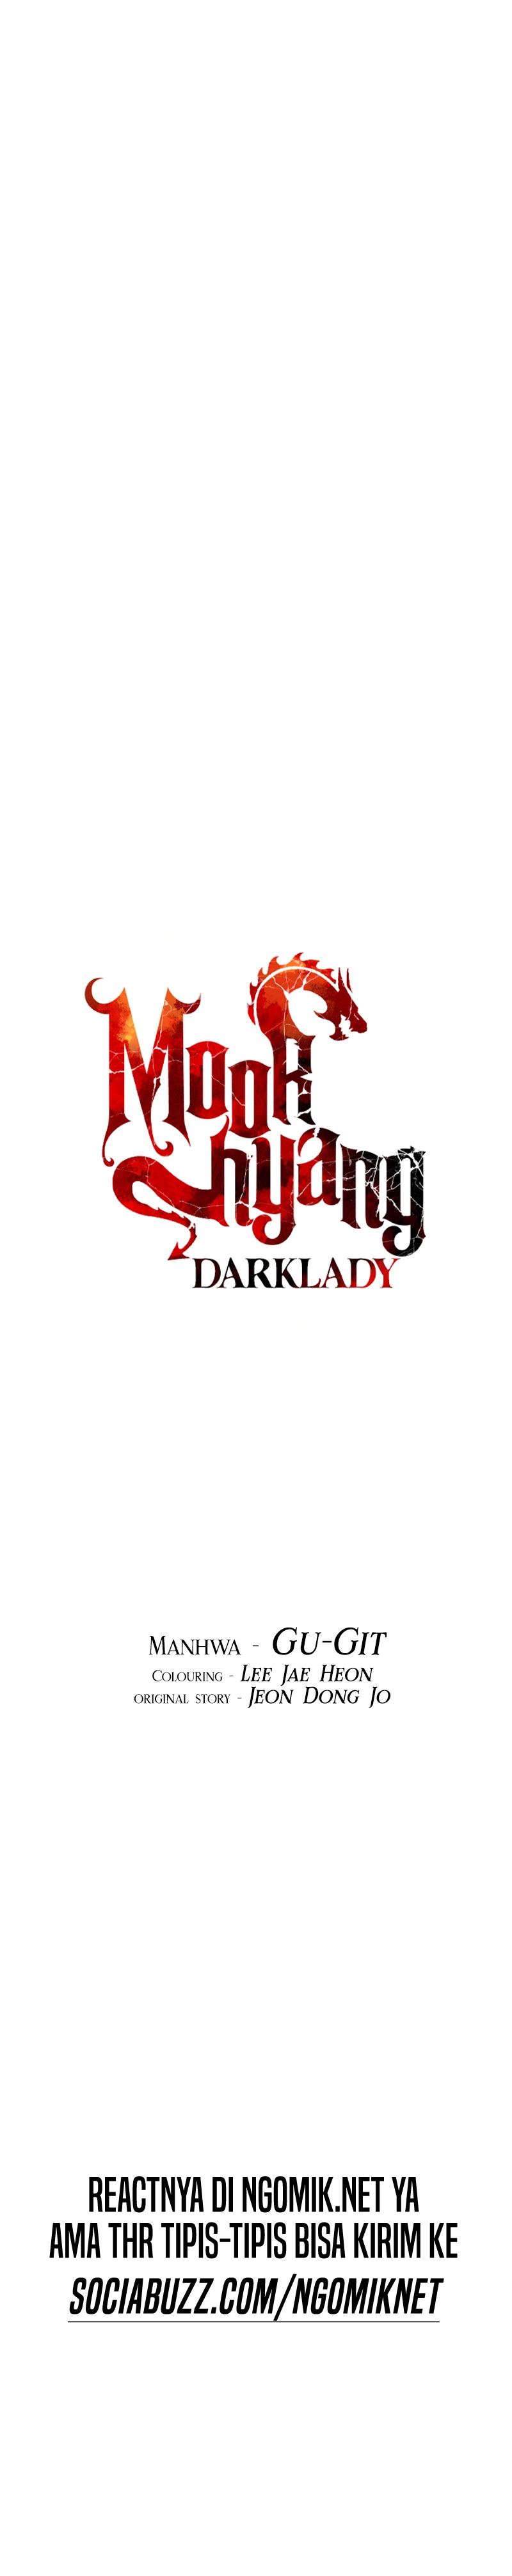 Mookhyang Dark Lady Chapter 173